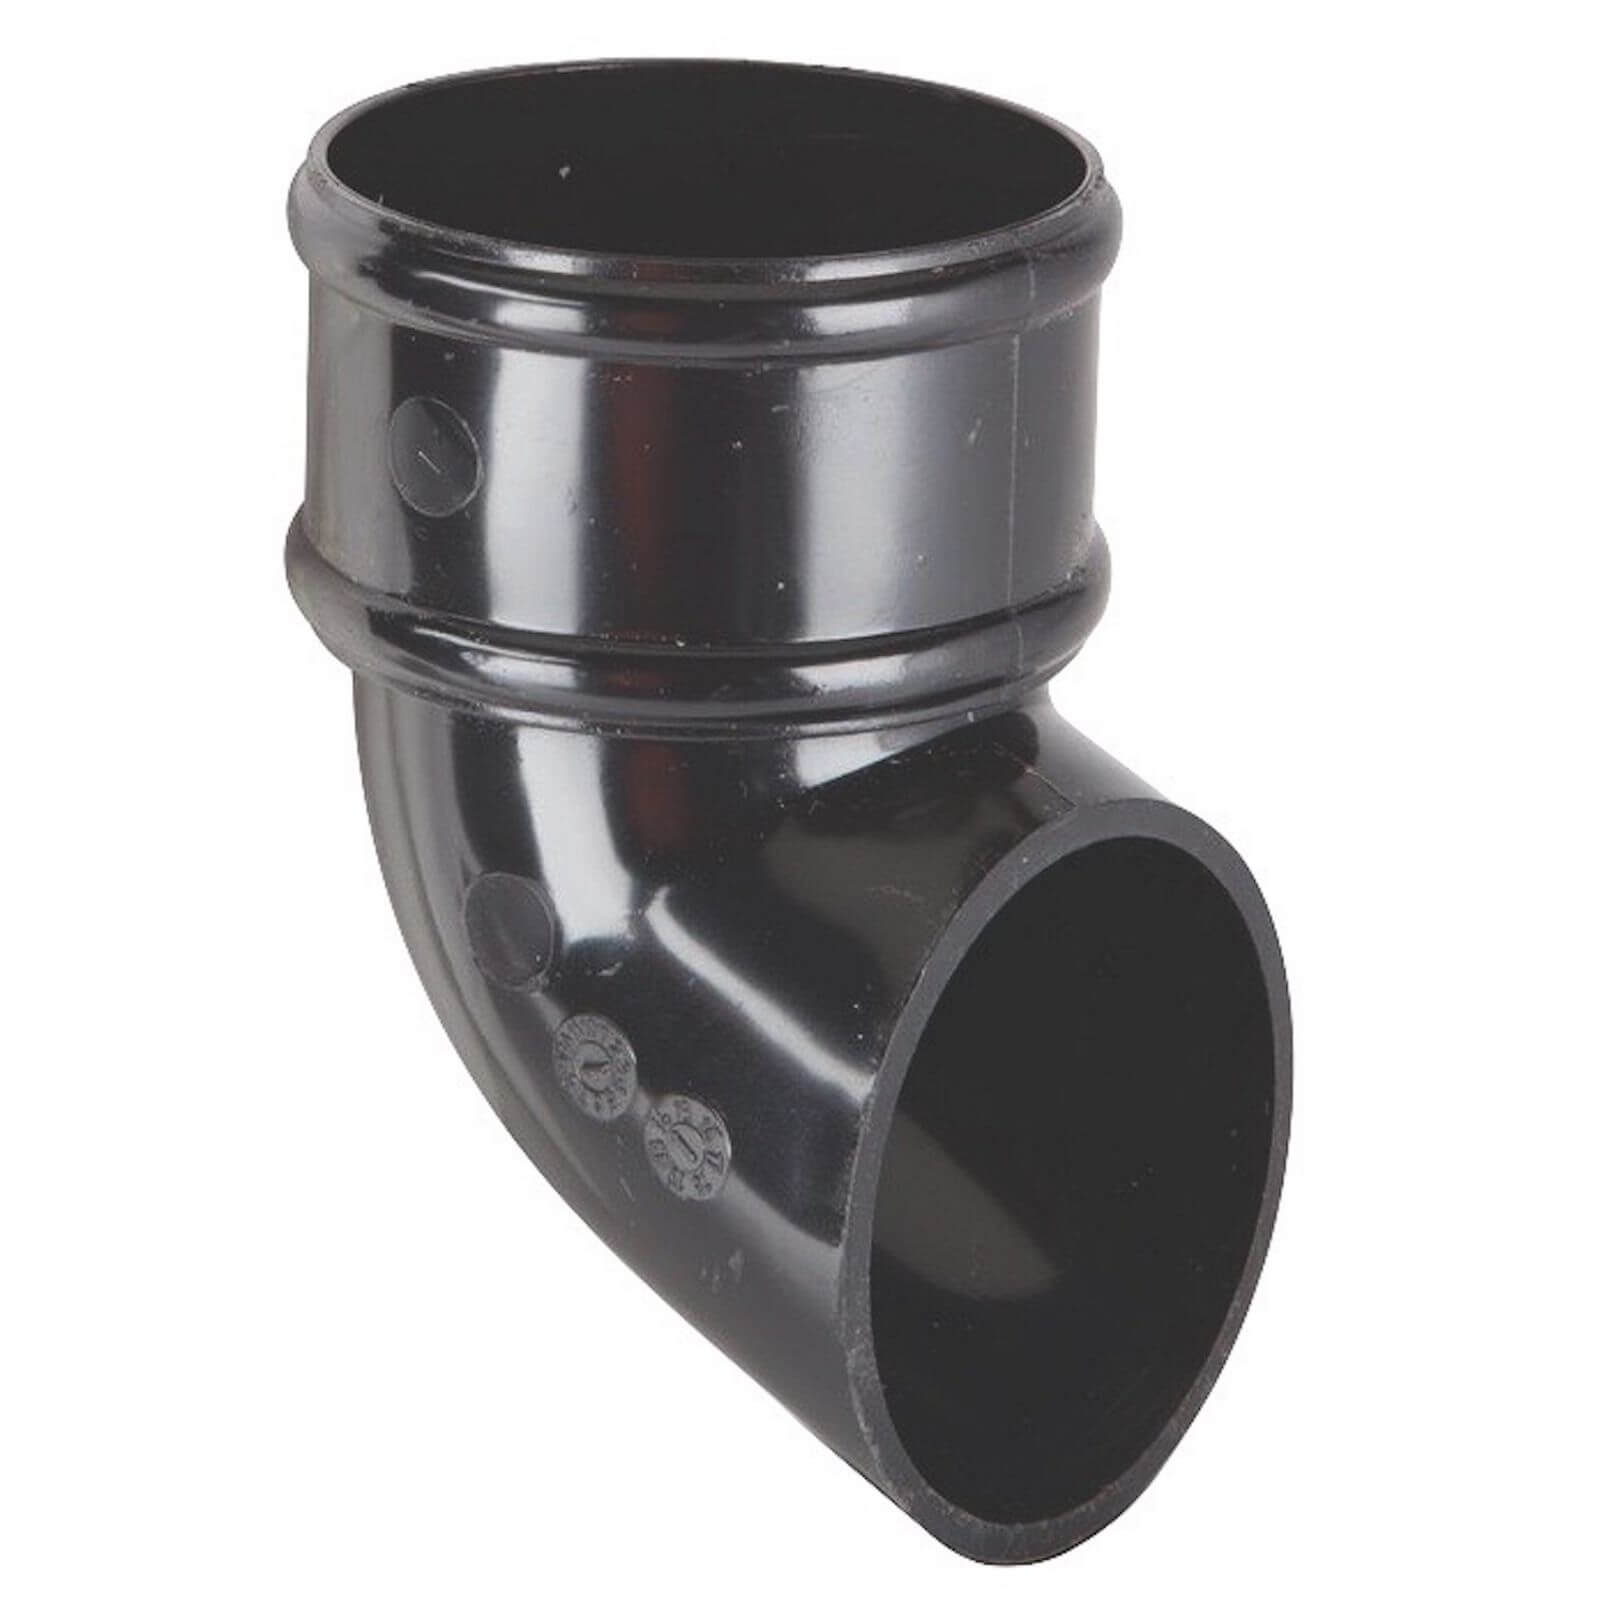 Polypipe Round Downpipe Shoe - 68mm - Black